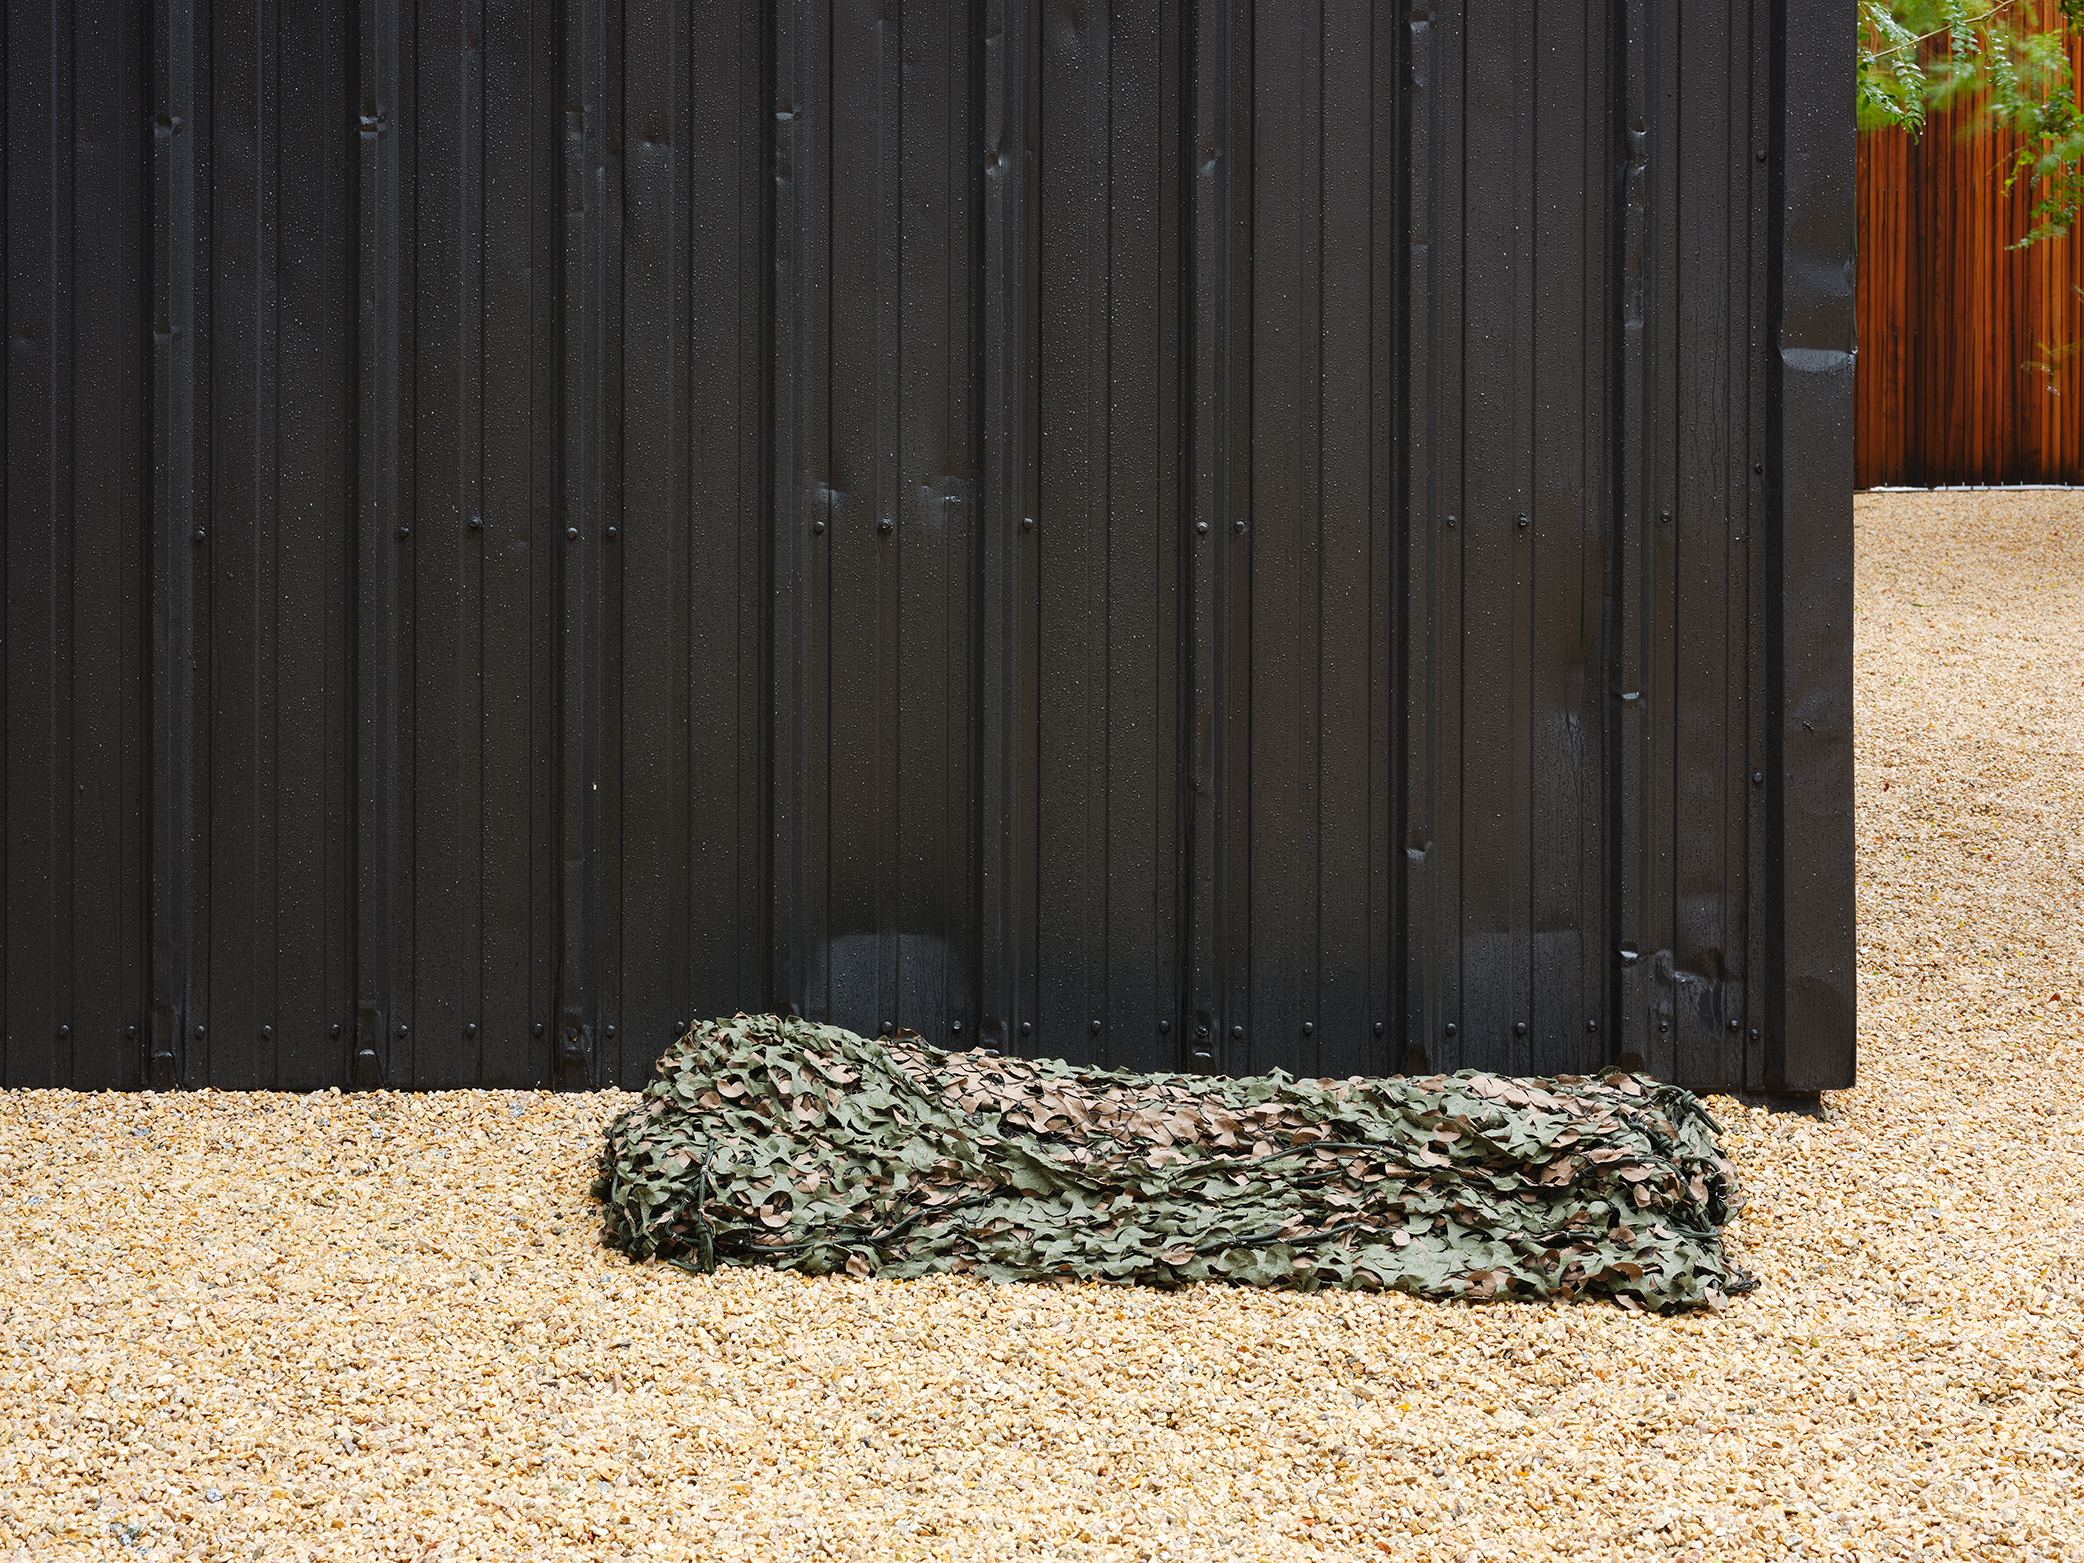 Abbas Akhavan, not titled, 2021, camouflage netting, 11 x 26 x 60 in. (28 x 65 x 152 cm) by 